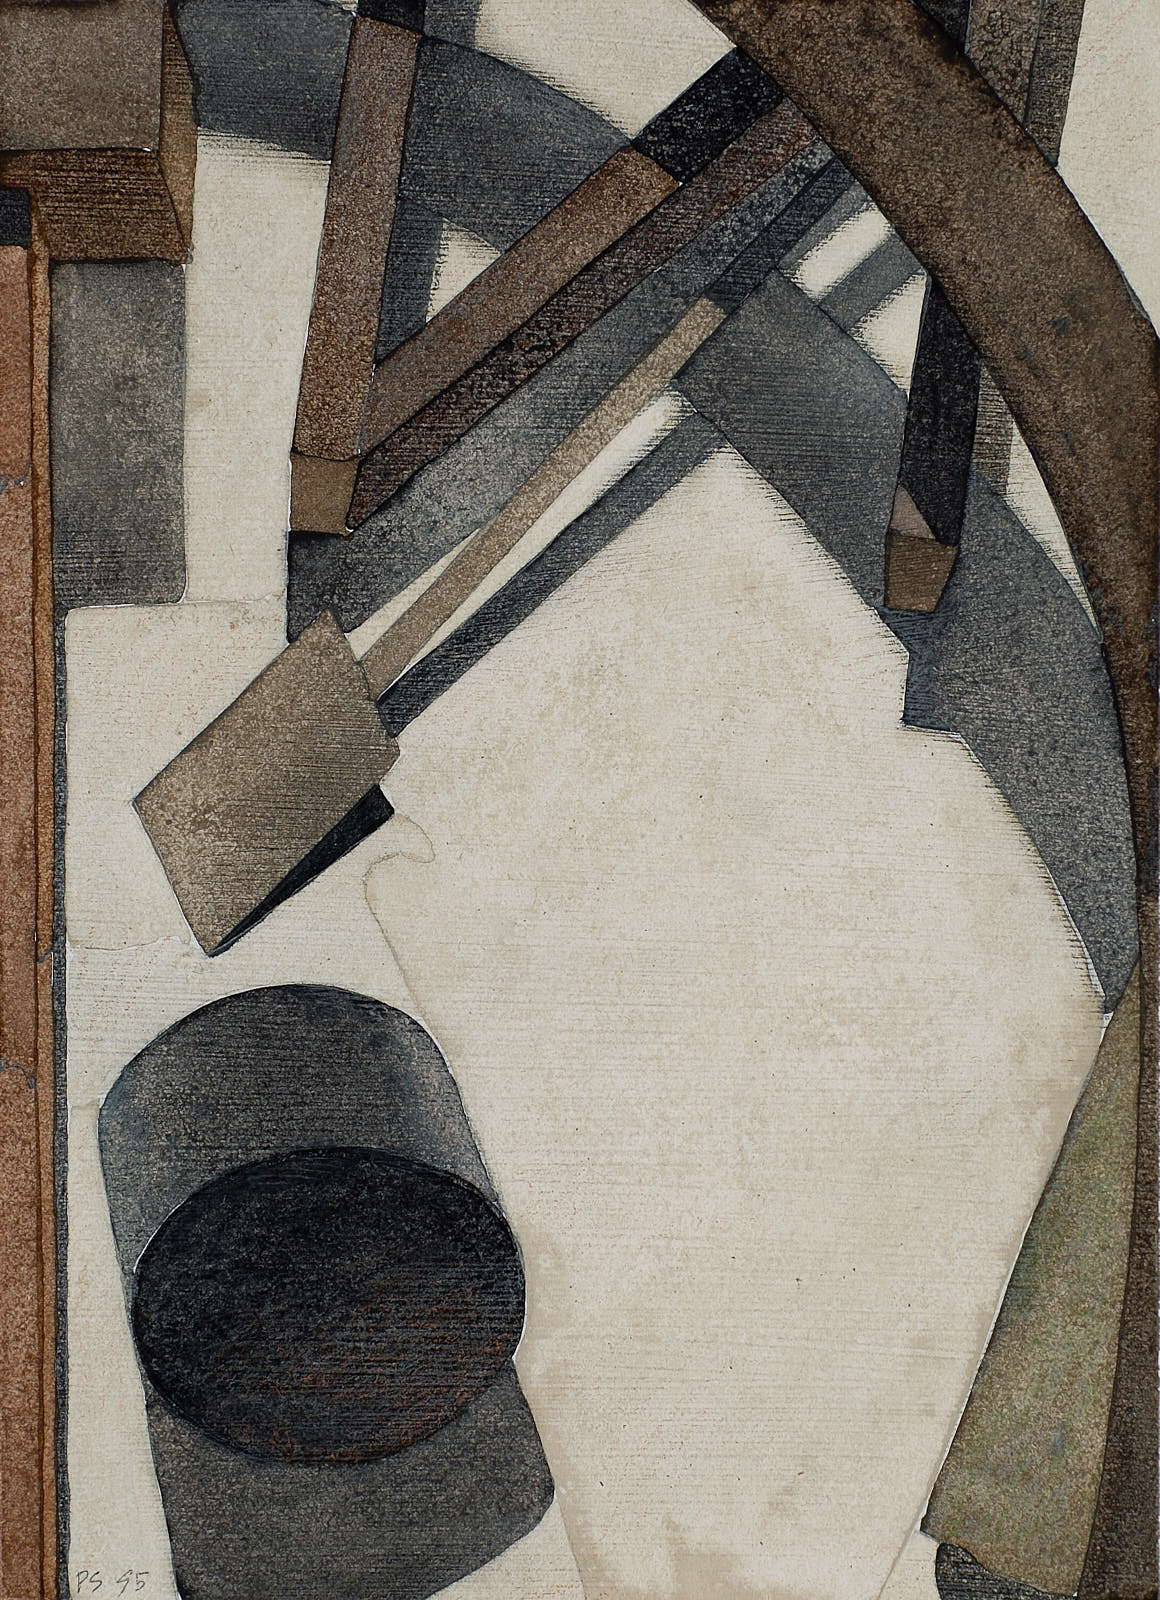 Still Life with Tools, 1995 gouache on paper. 10 x 7'' private collection